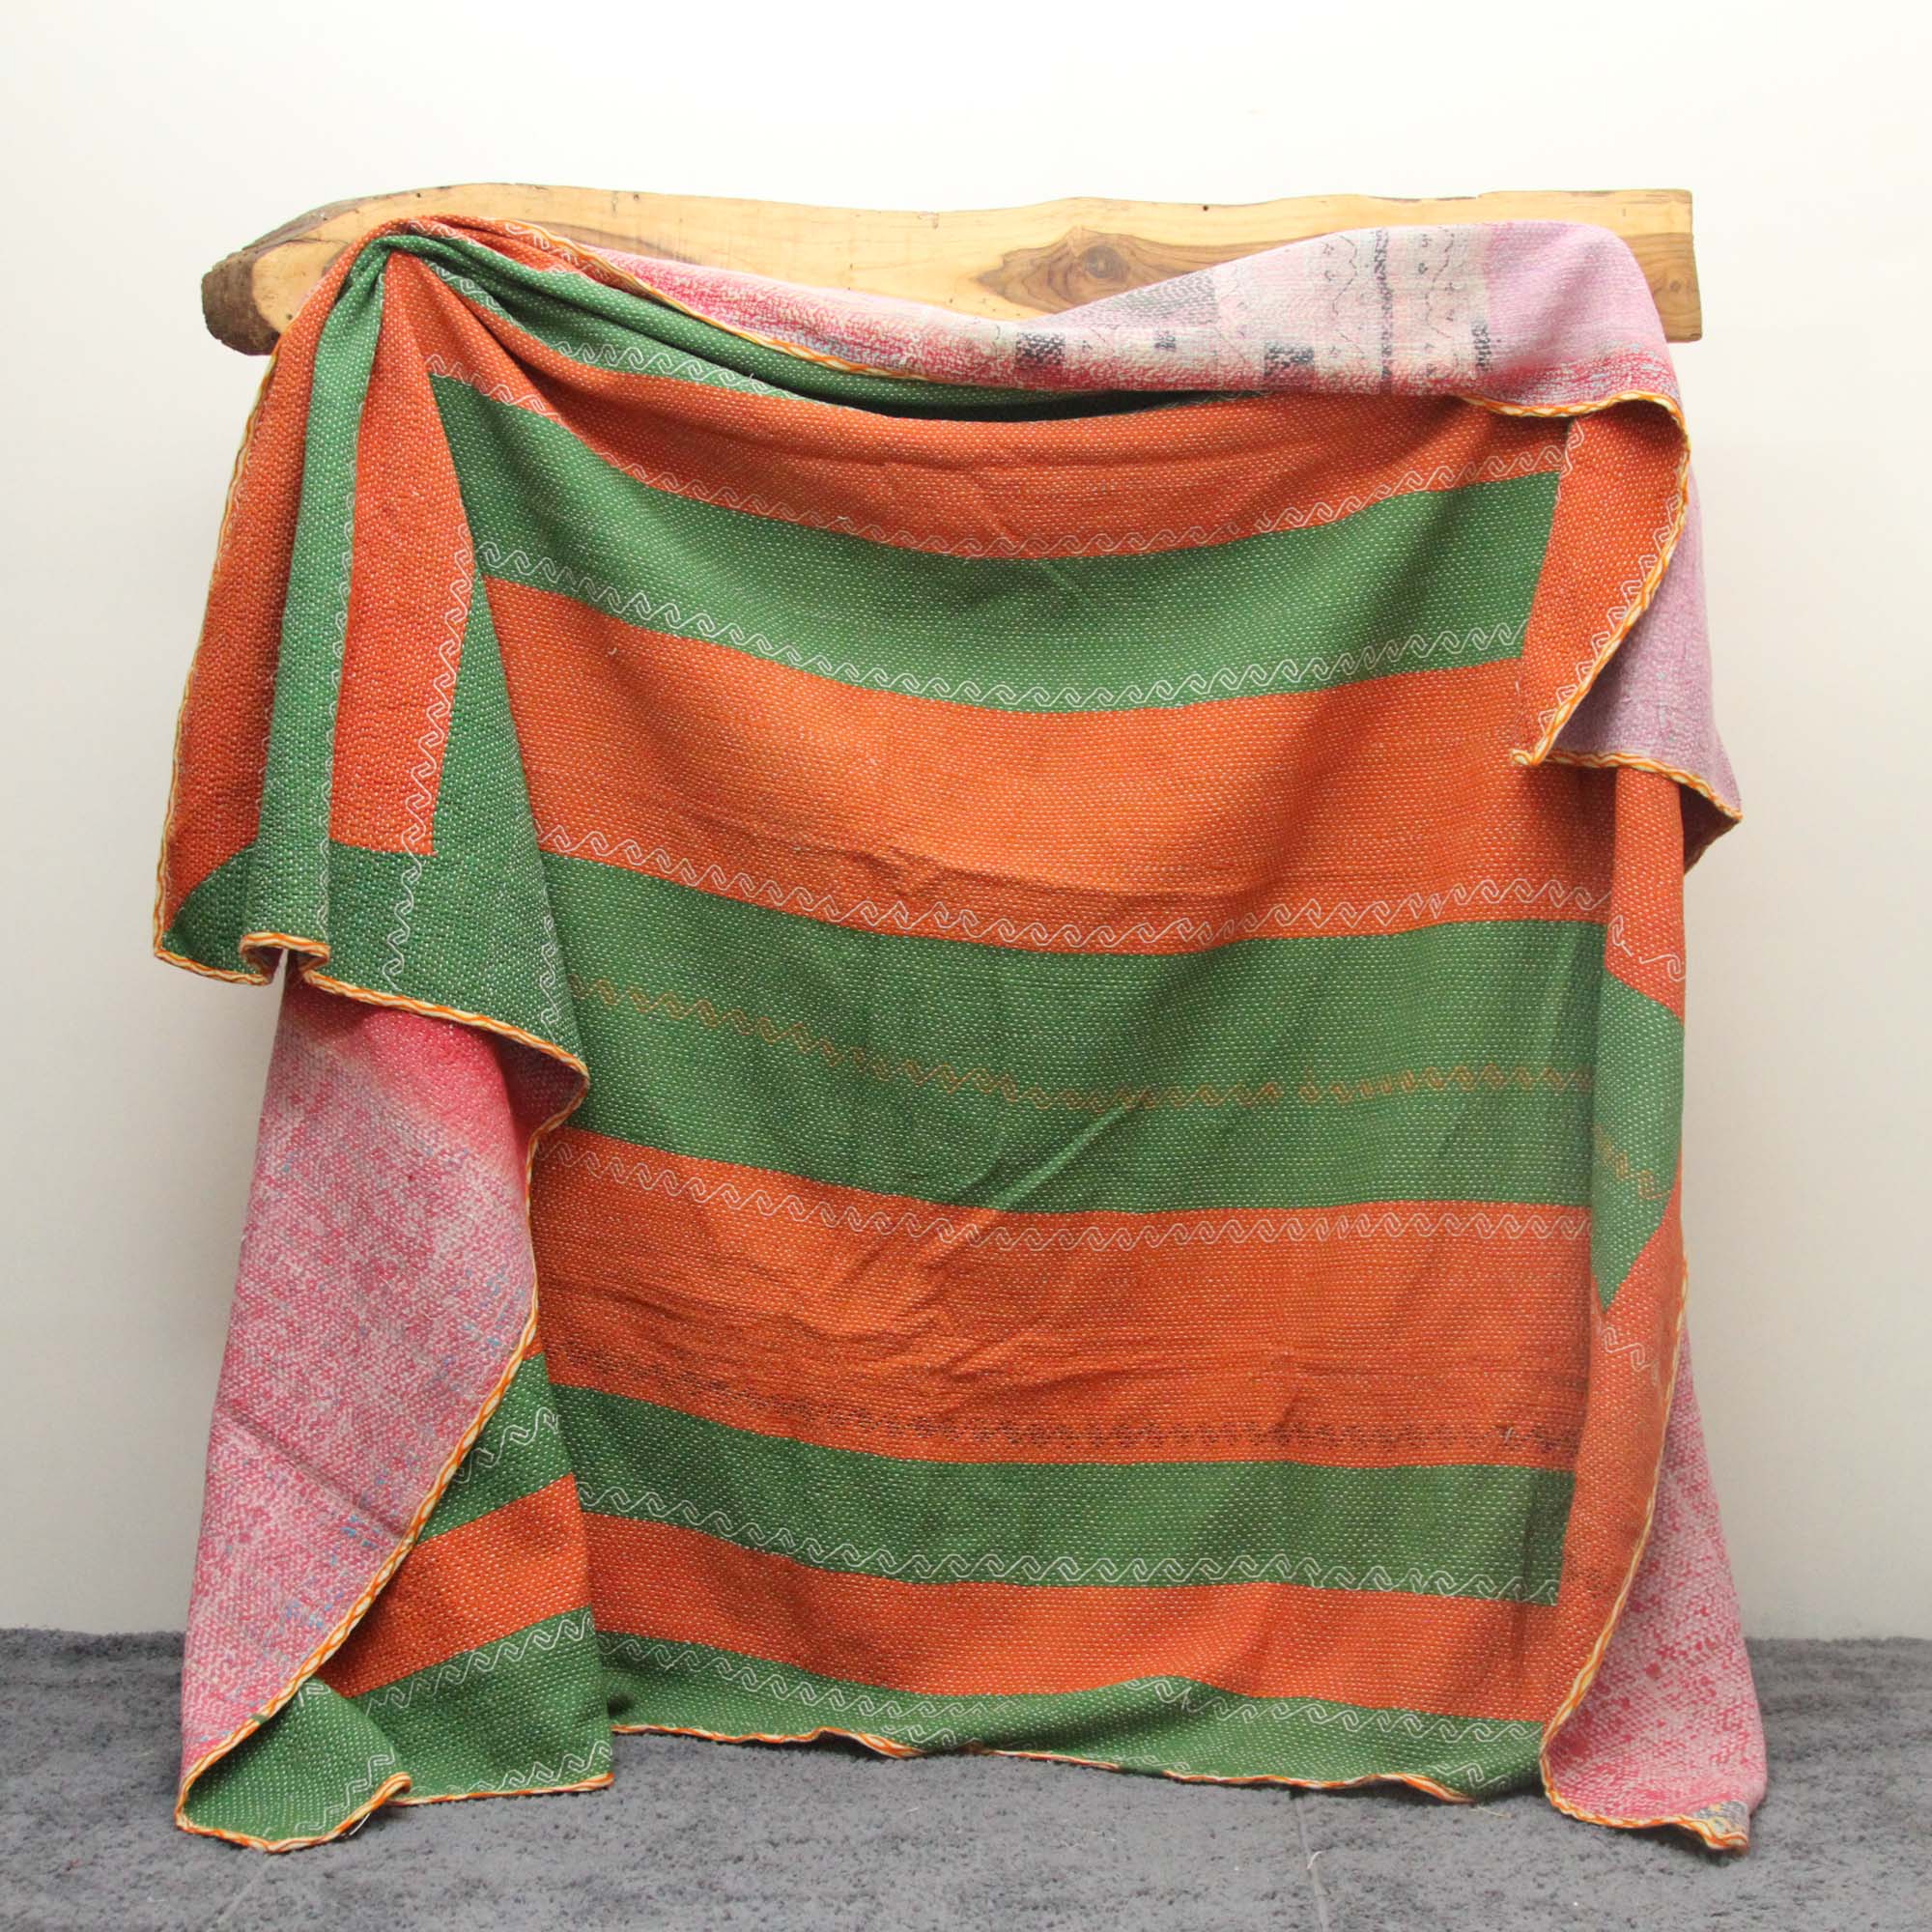 The colorful patchwork kantha quilts will complement any projects